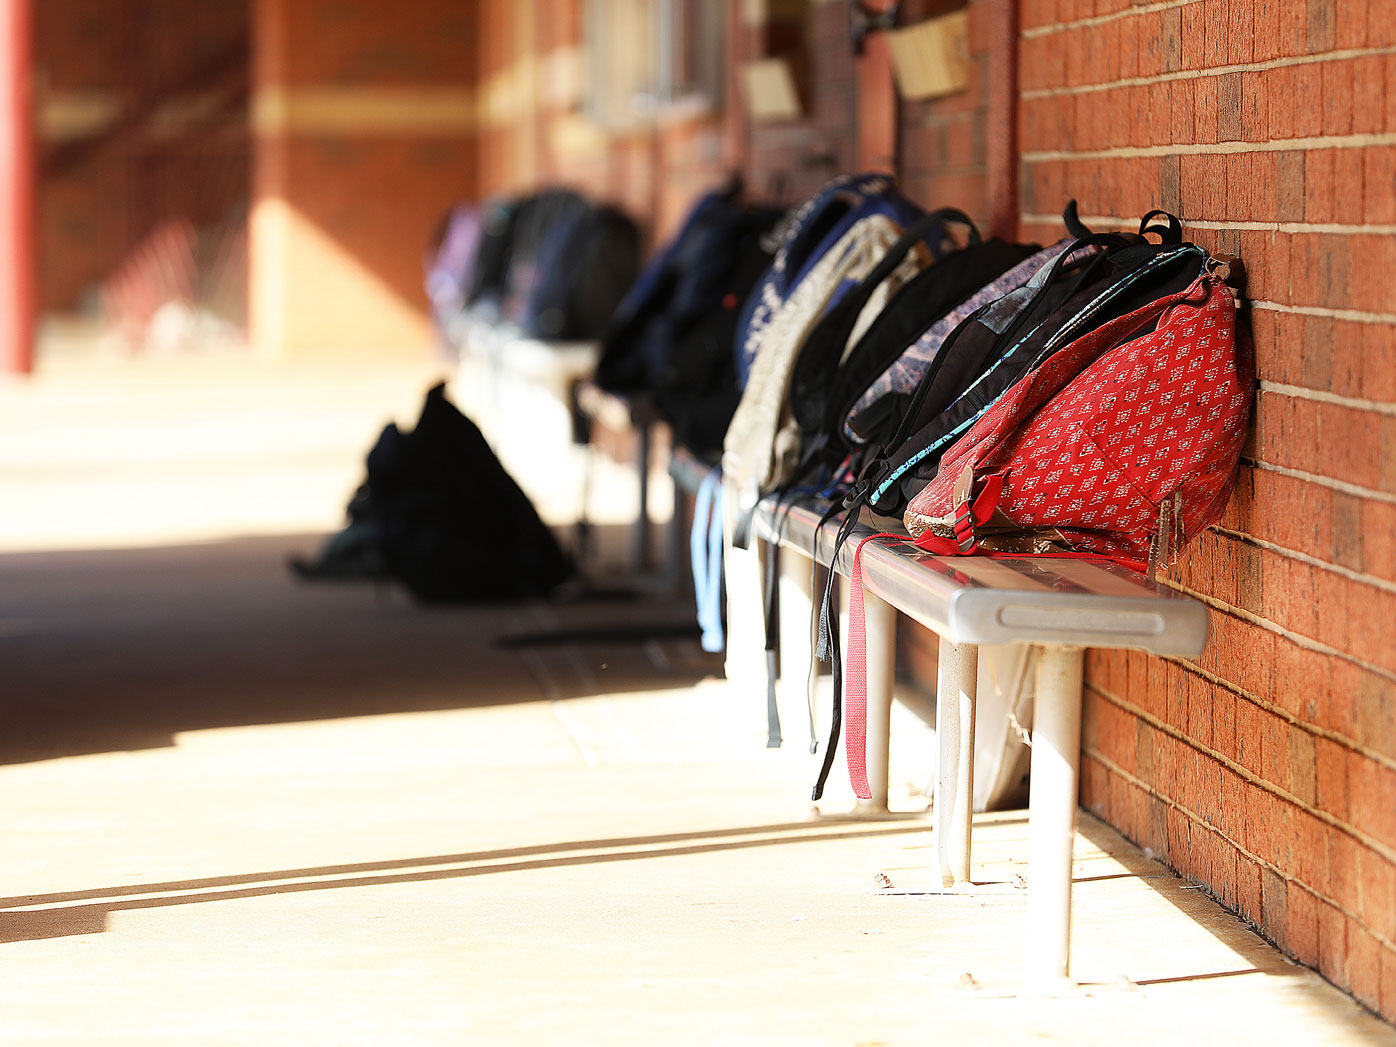 School bags lined up outside classroom.